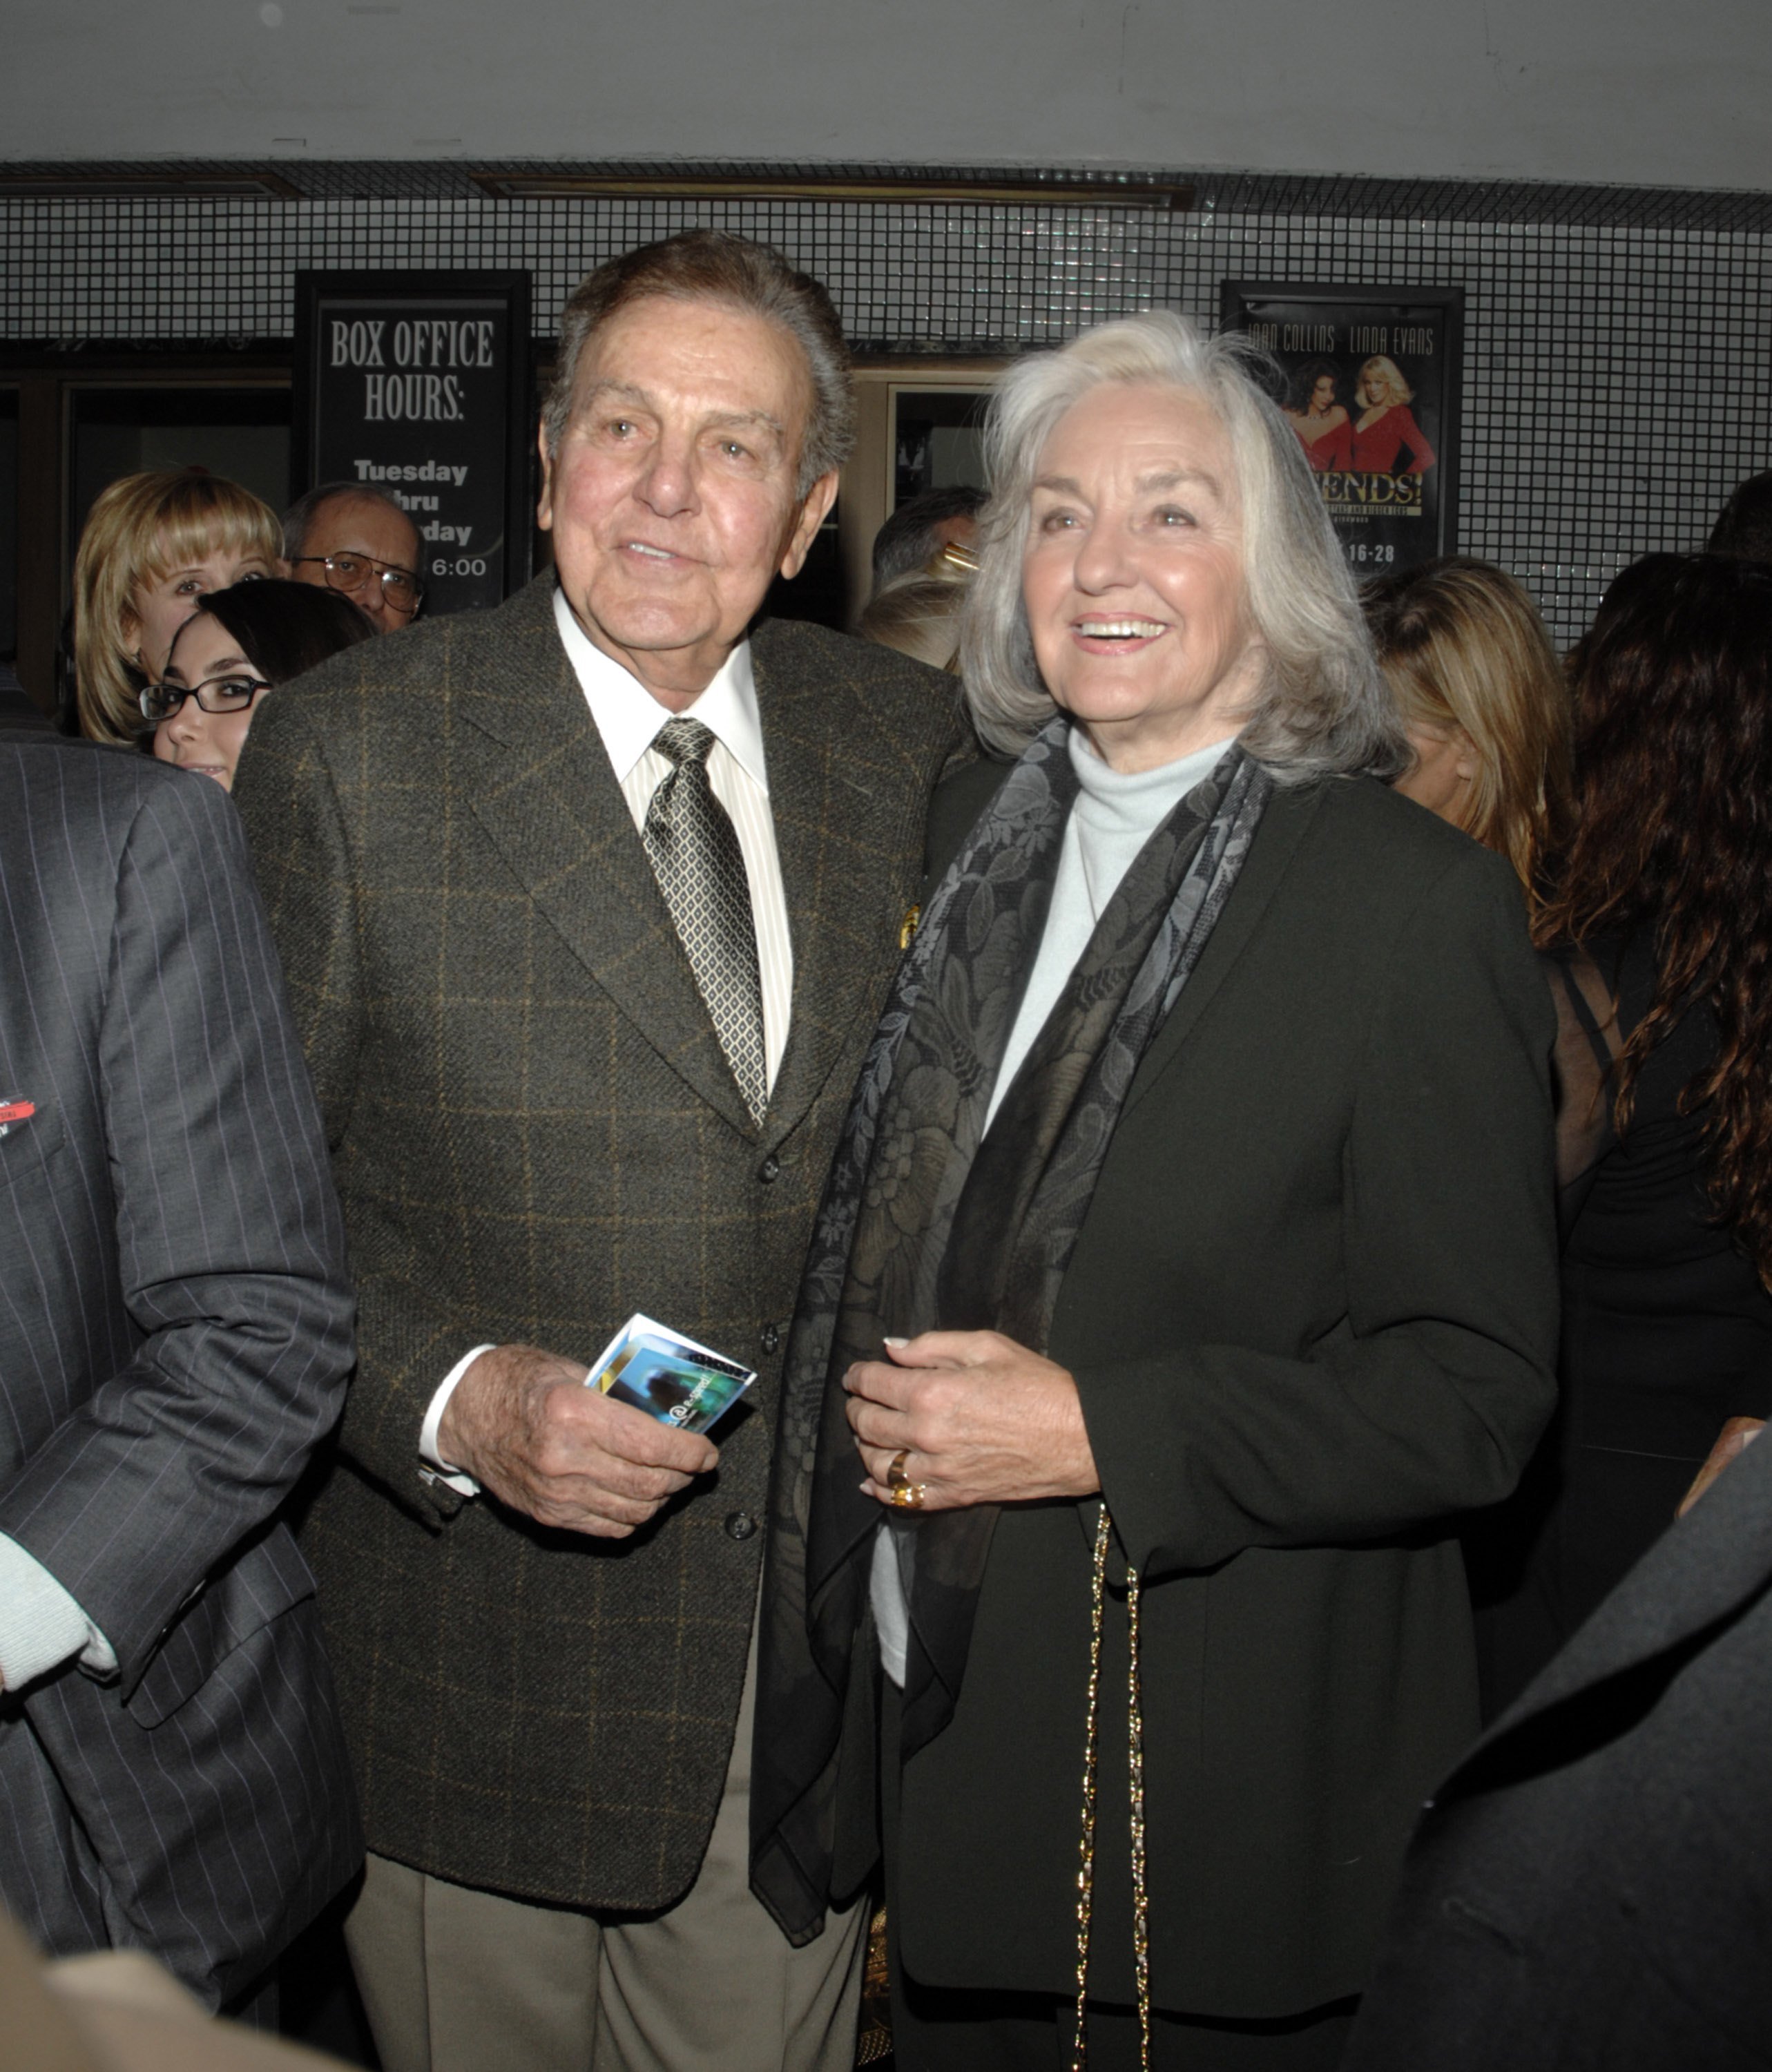 Mike Connors and Mary Lou Wiley attend the premiere performance of Joan Collins and Linda Evans in "Legends" on January 16, 2007 at the Wlishire Theatre in Beverly Hills, California. | Source: Getty Images